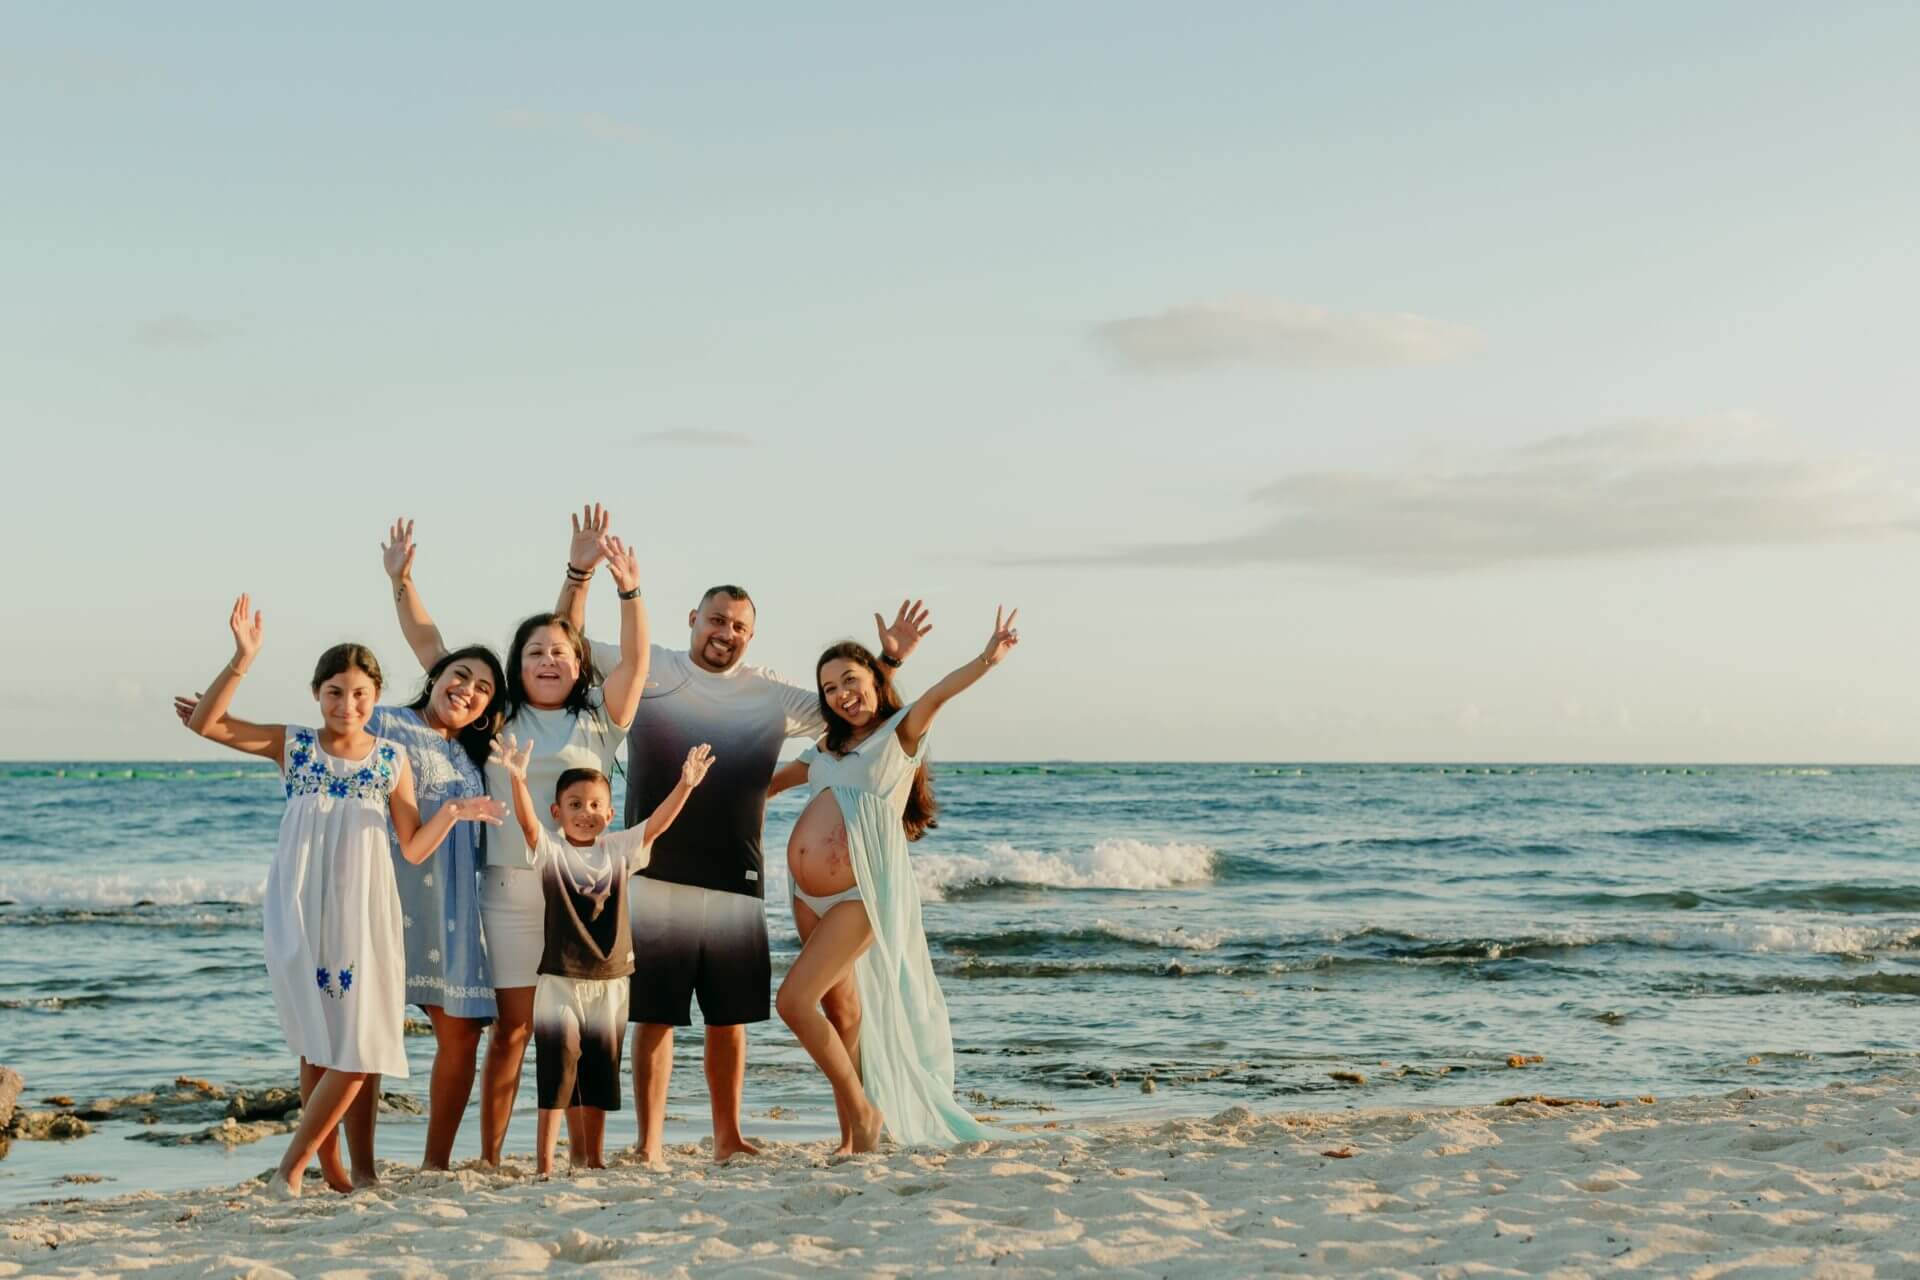 Family Photo Poses - Beach Shutters Photography